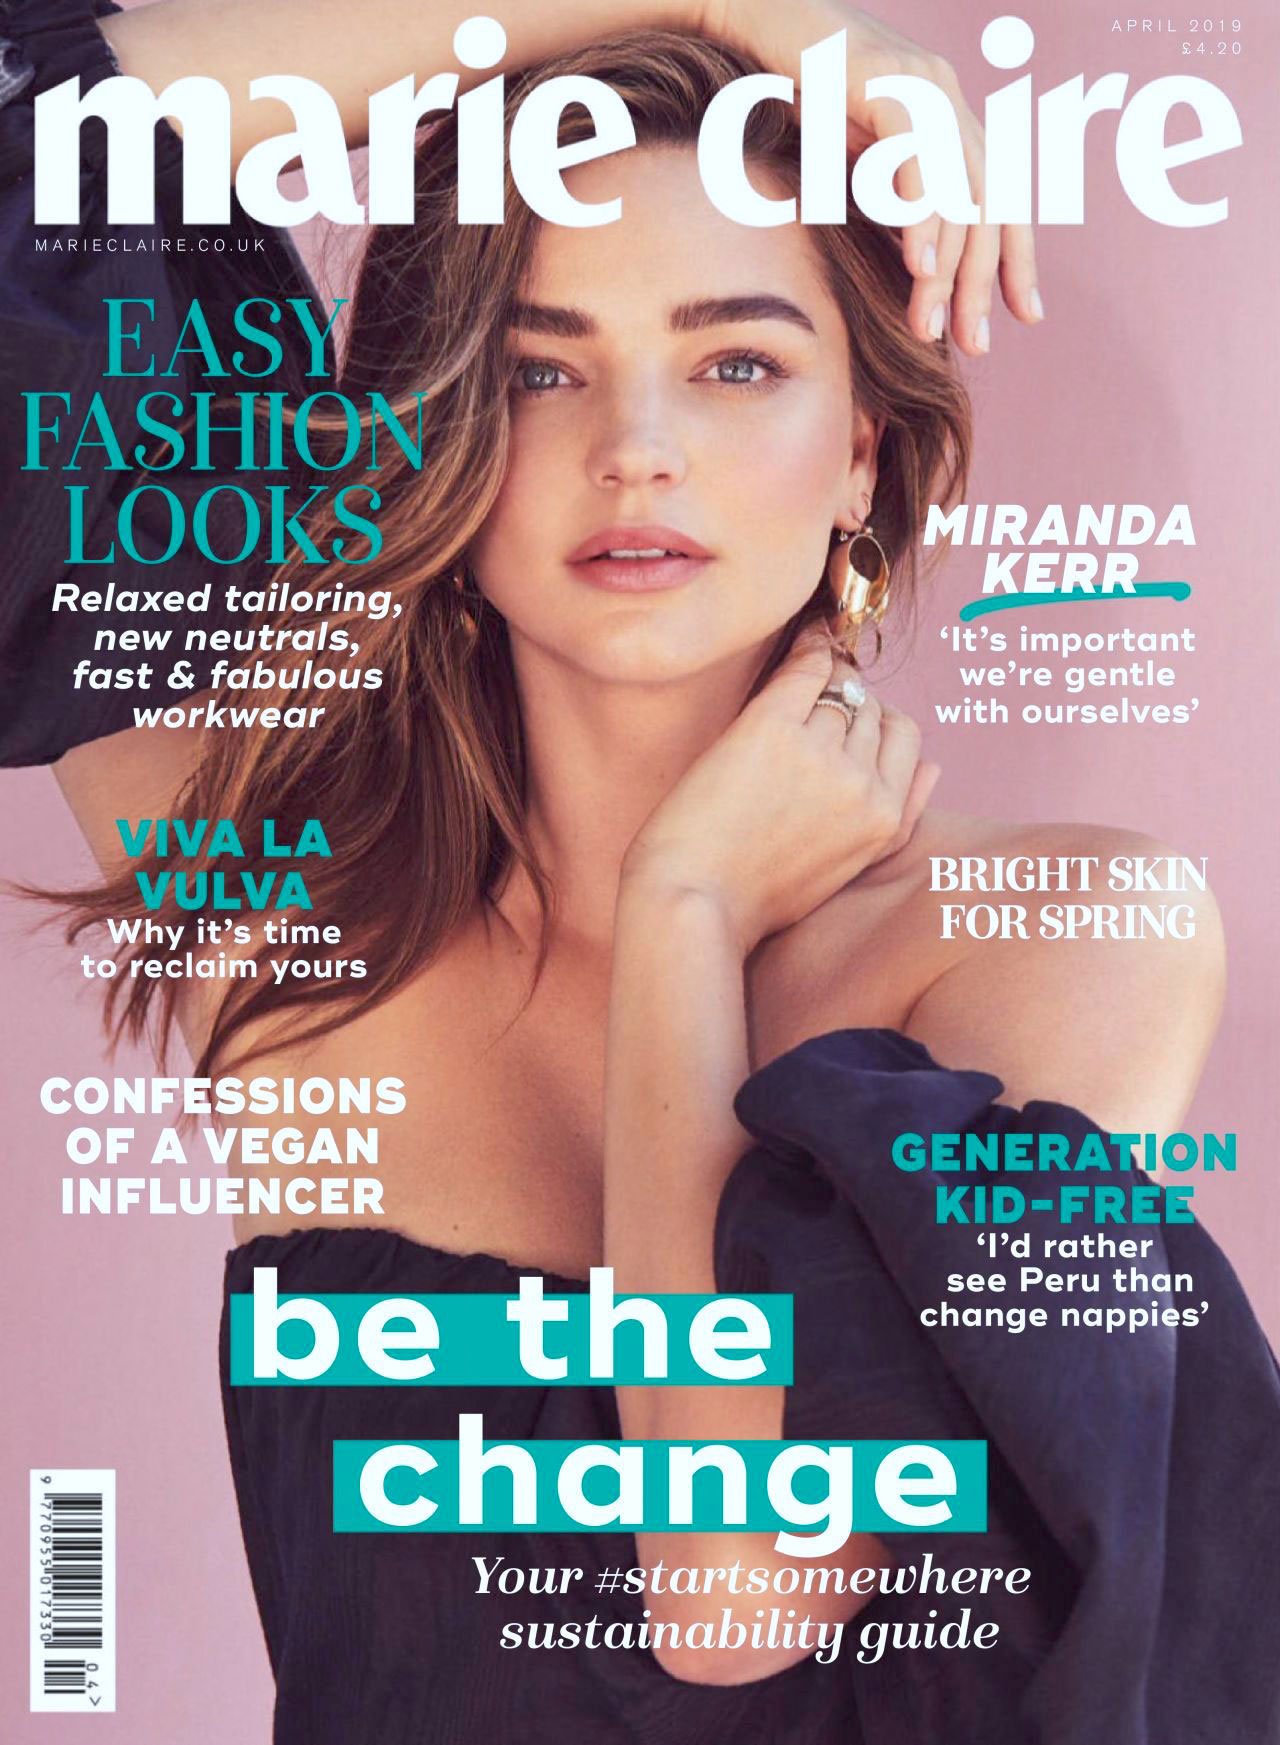 Fashion magazine covers inspiration and tips to design one